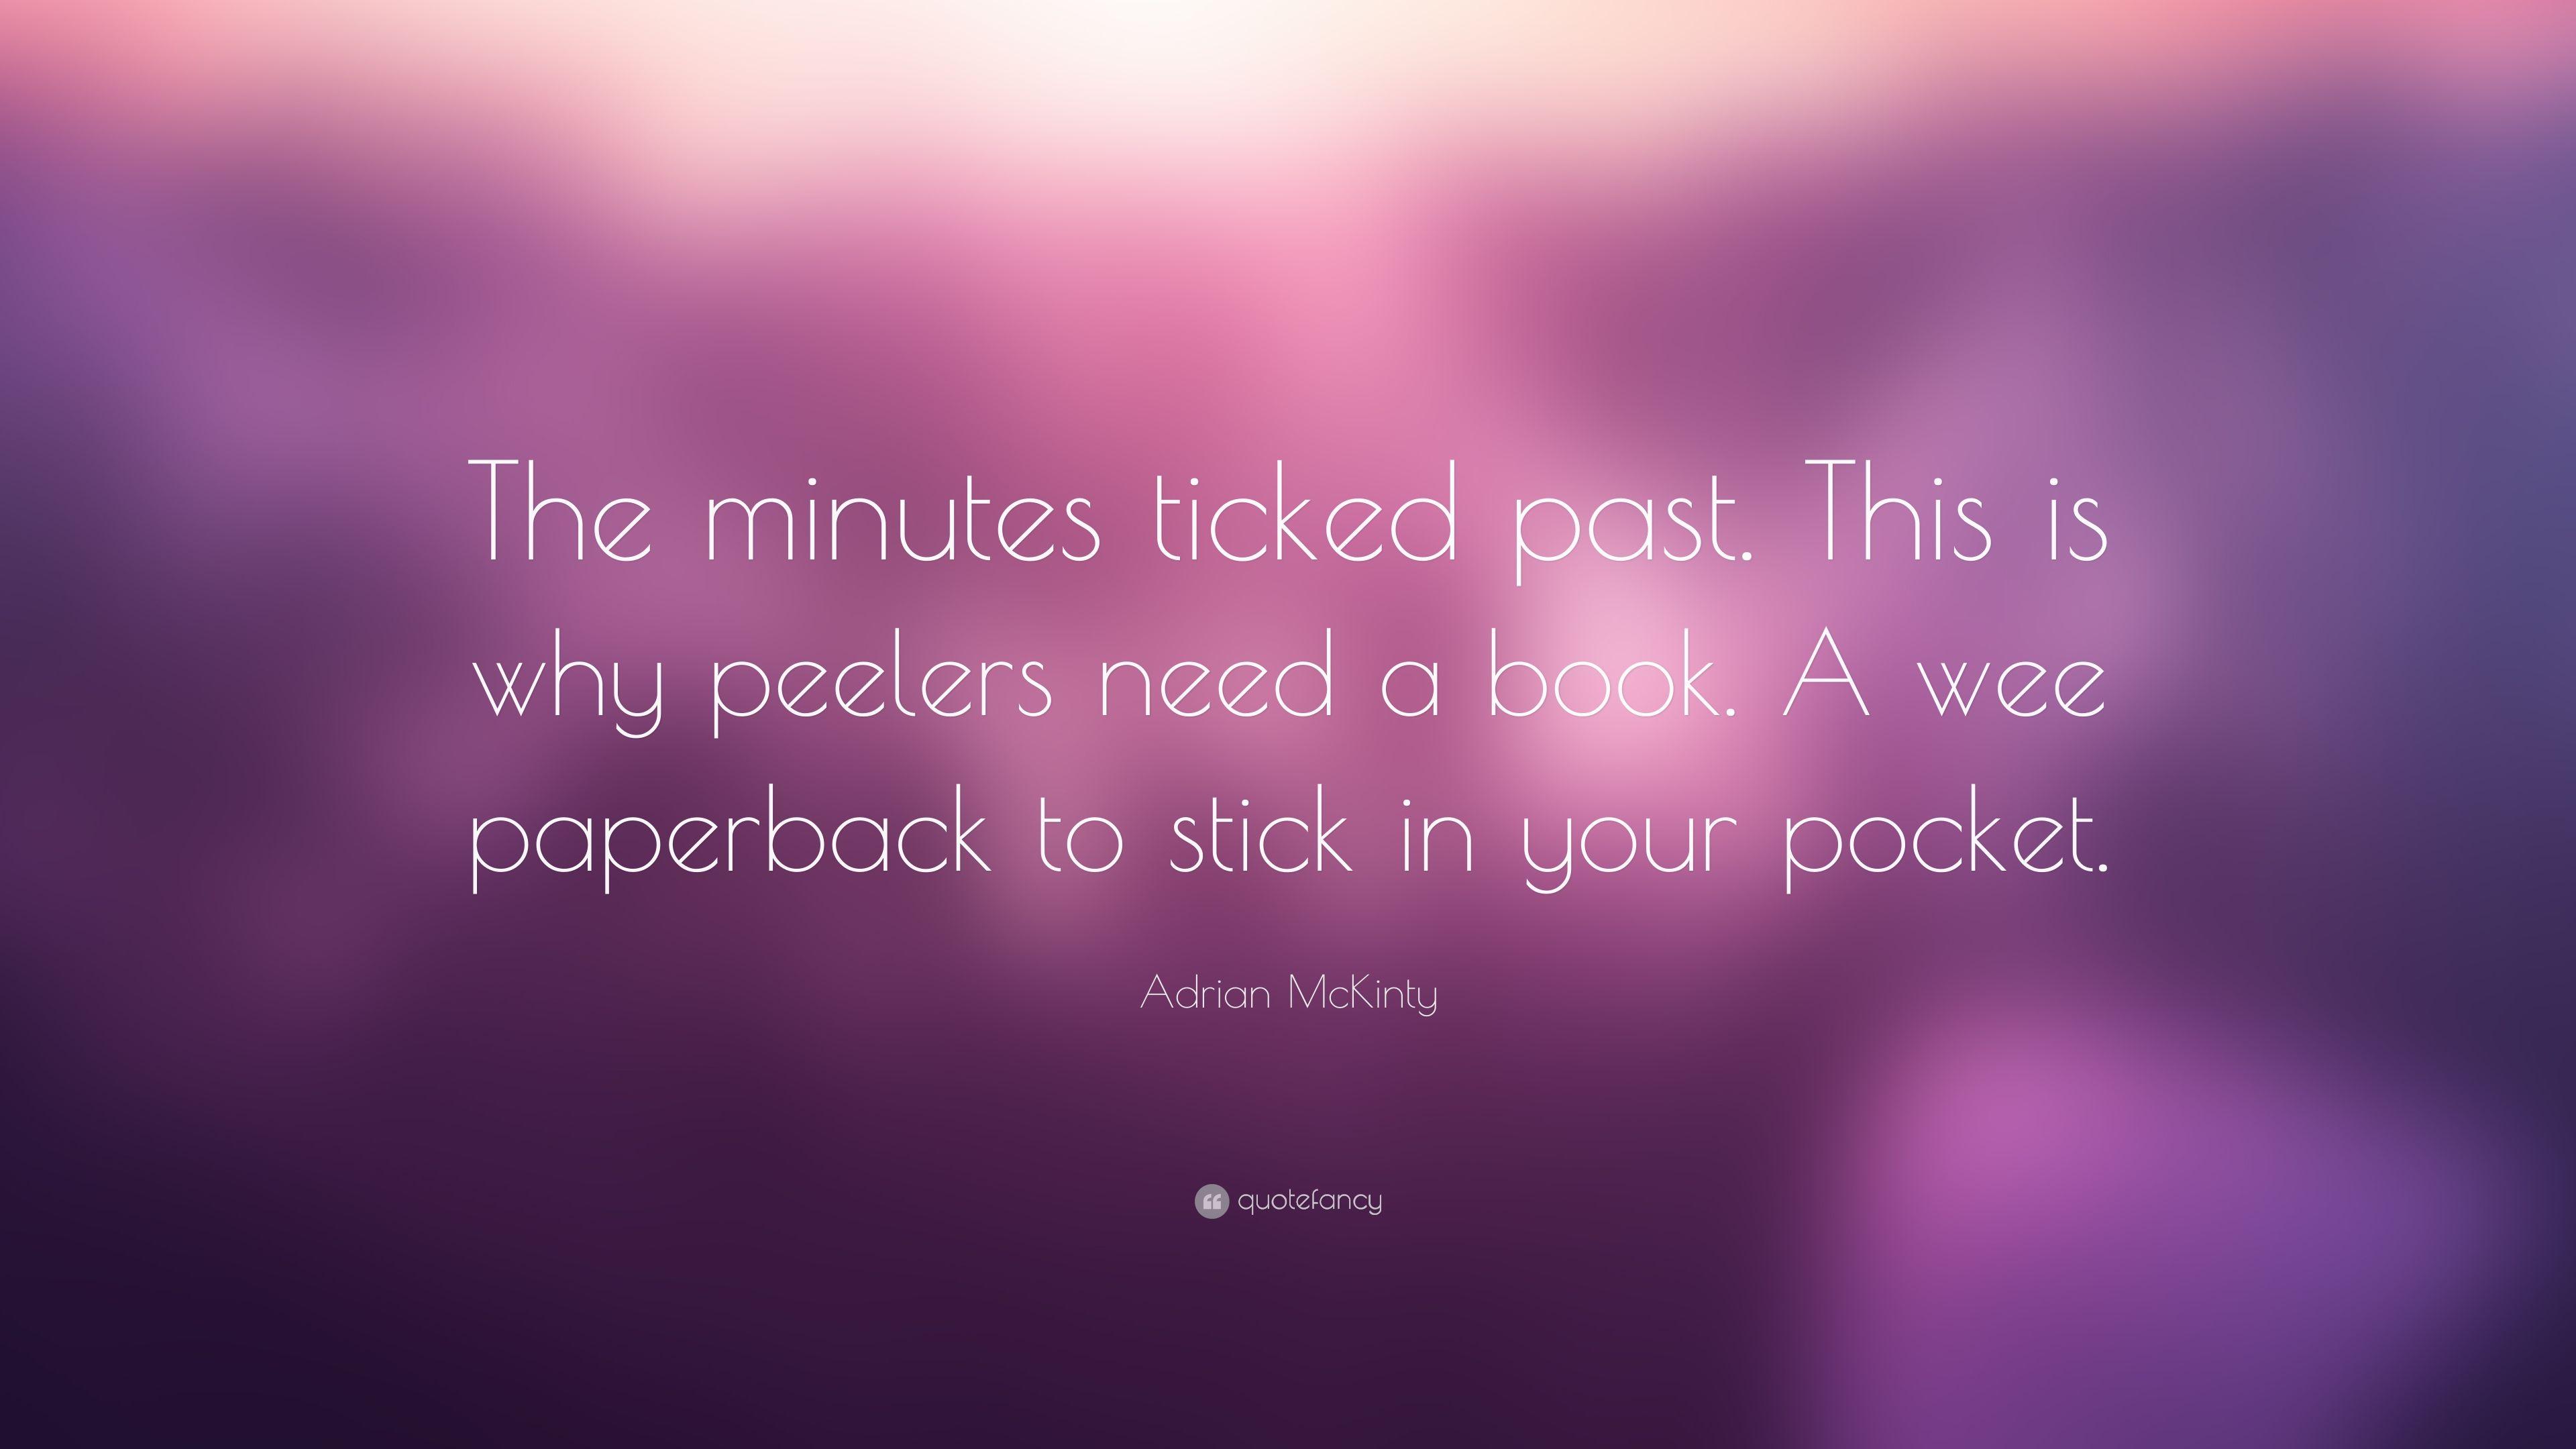 Adrian McKinty Quote: “The minutes ticked past. This is why peelers